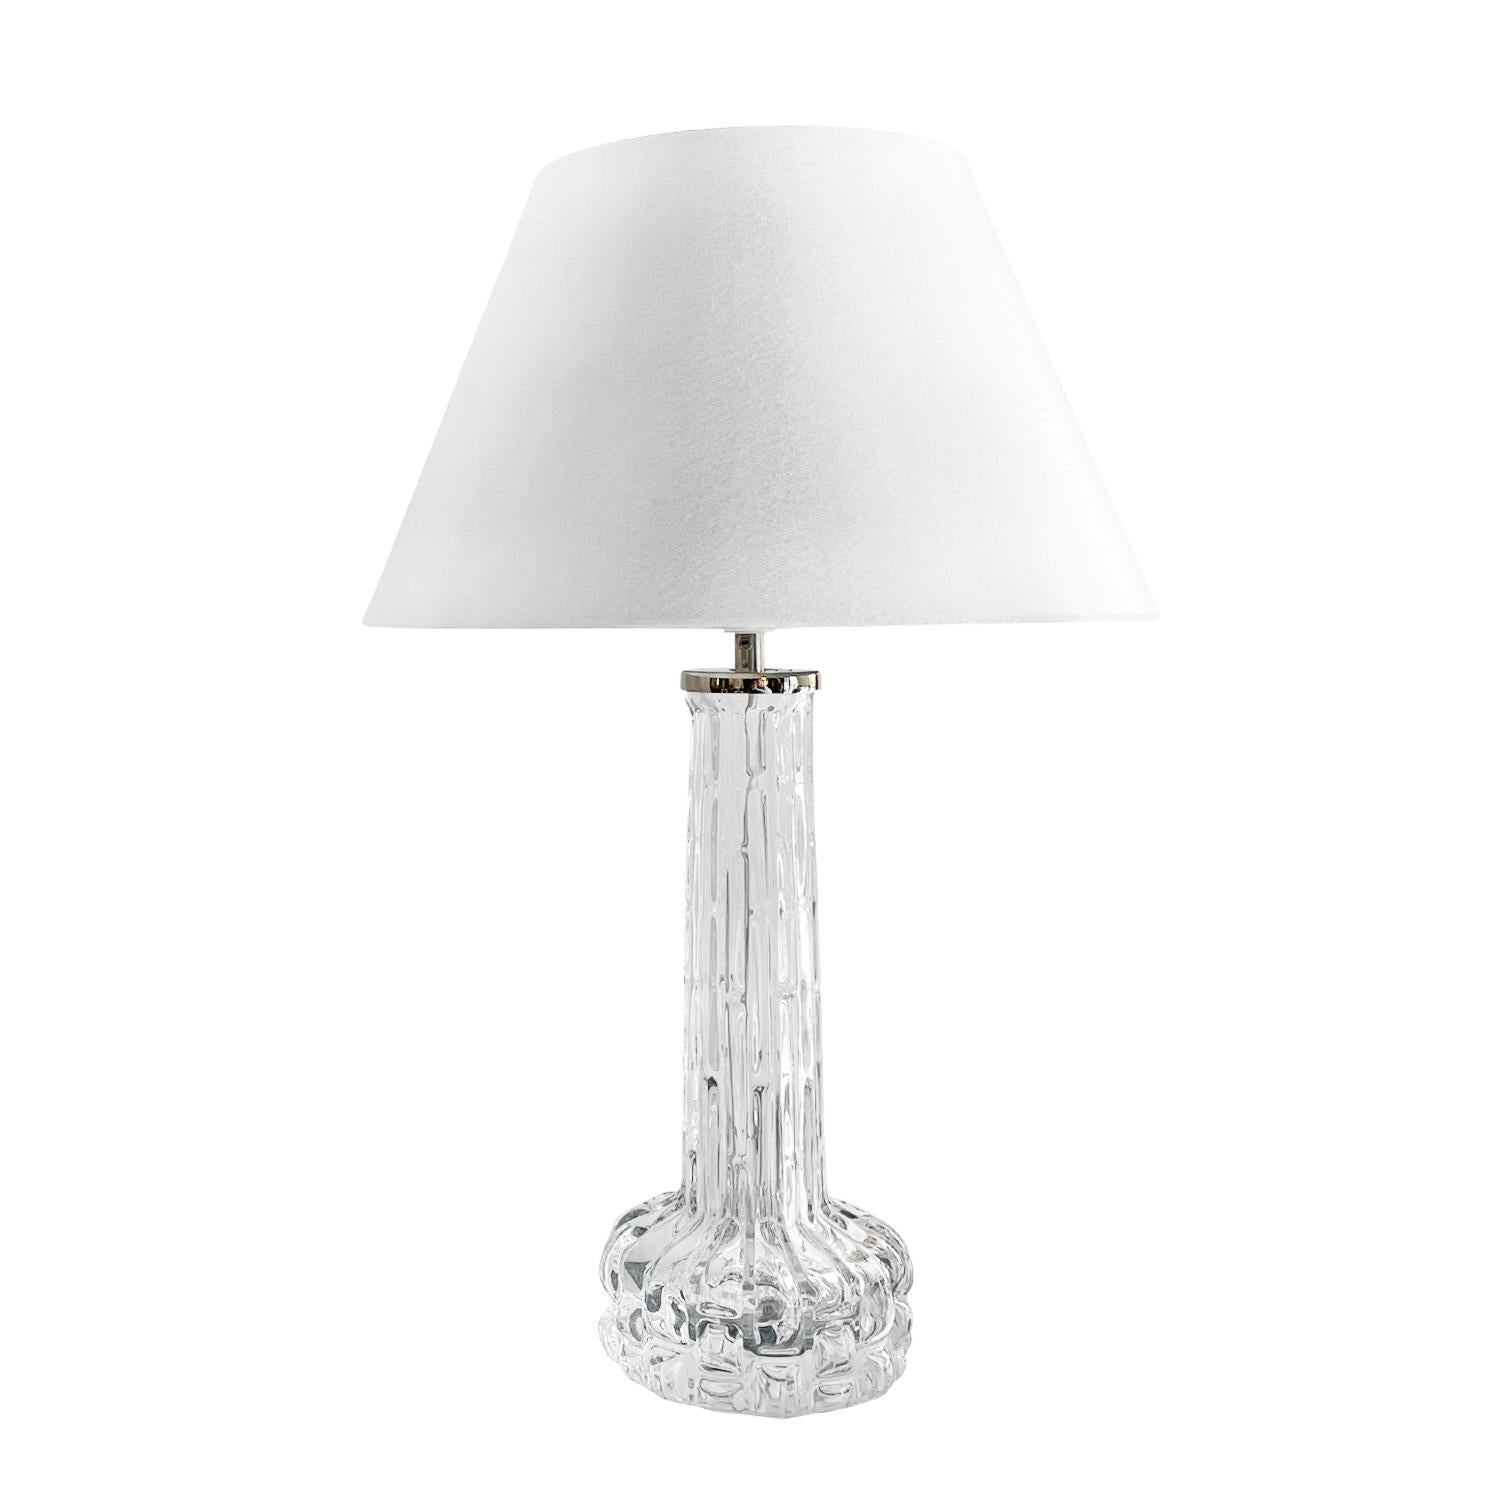 20th century Swedish Orrefors glass table lamp - desk light by Carl Fagerlund
PELI-1149
A vintage Mid-Century Modern Swedish table lamp made of hand blown Orrefors glass with a new white round shade, the beam is enhanced with a chrome ring,